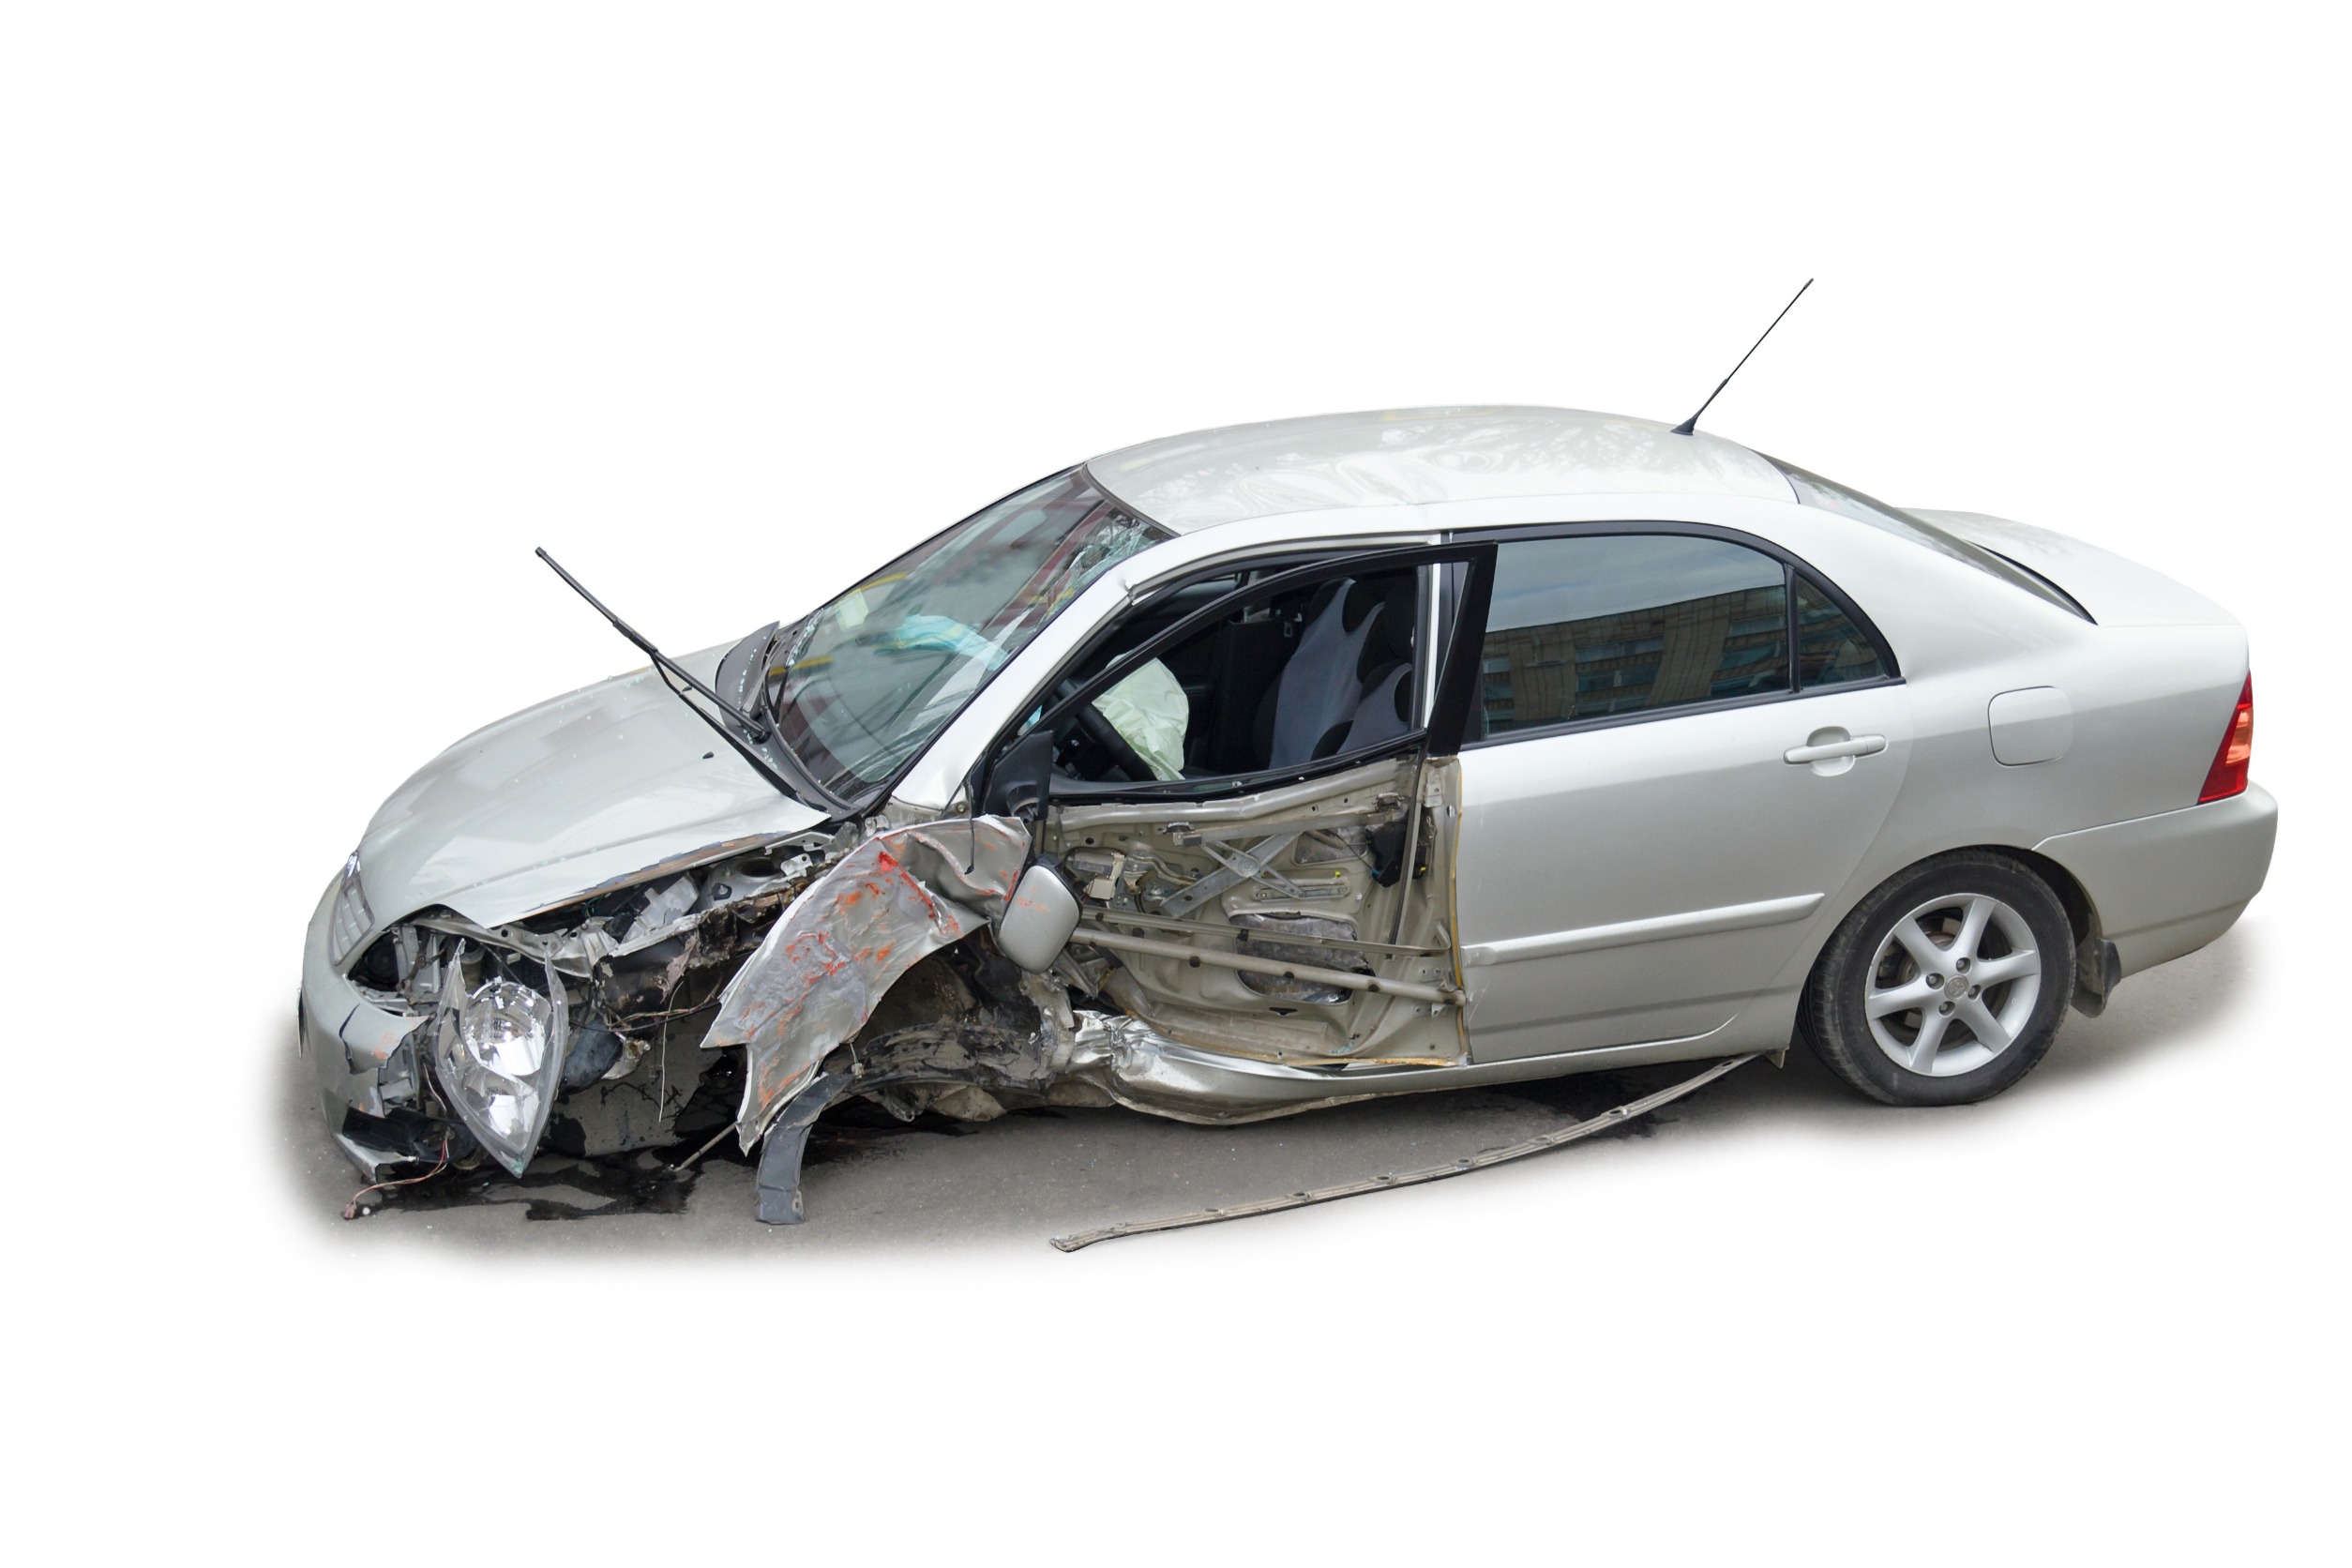 Know your rights in a FL sideswipe accident